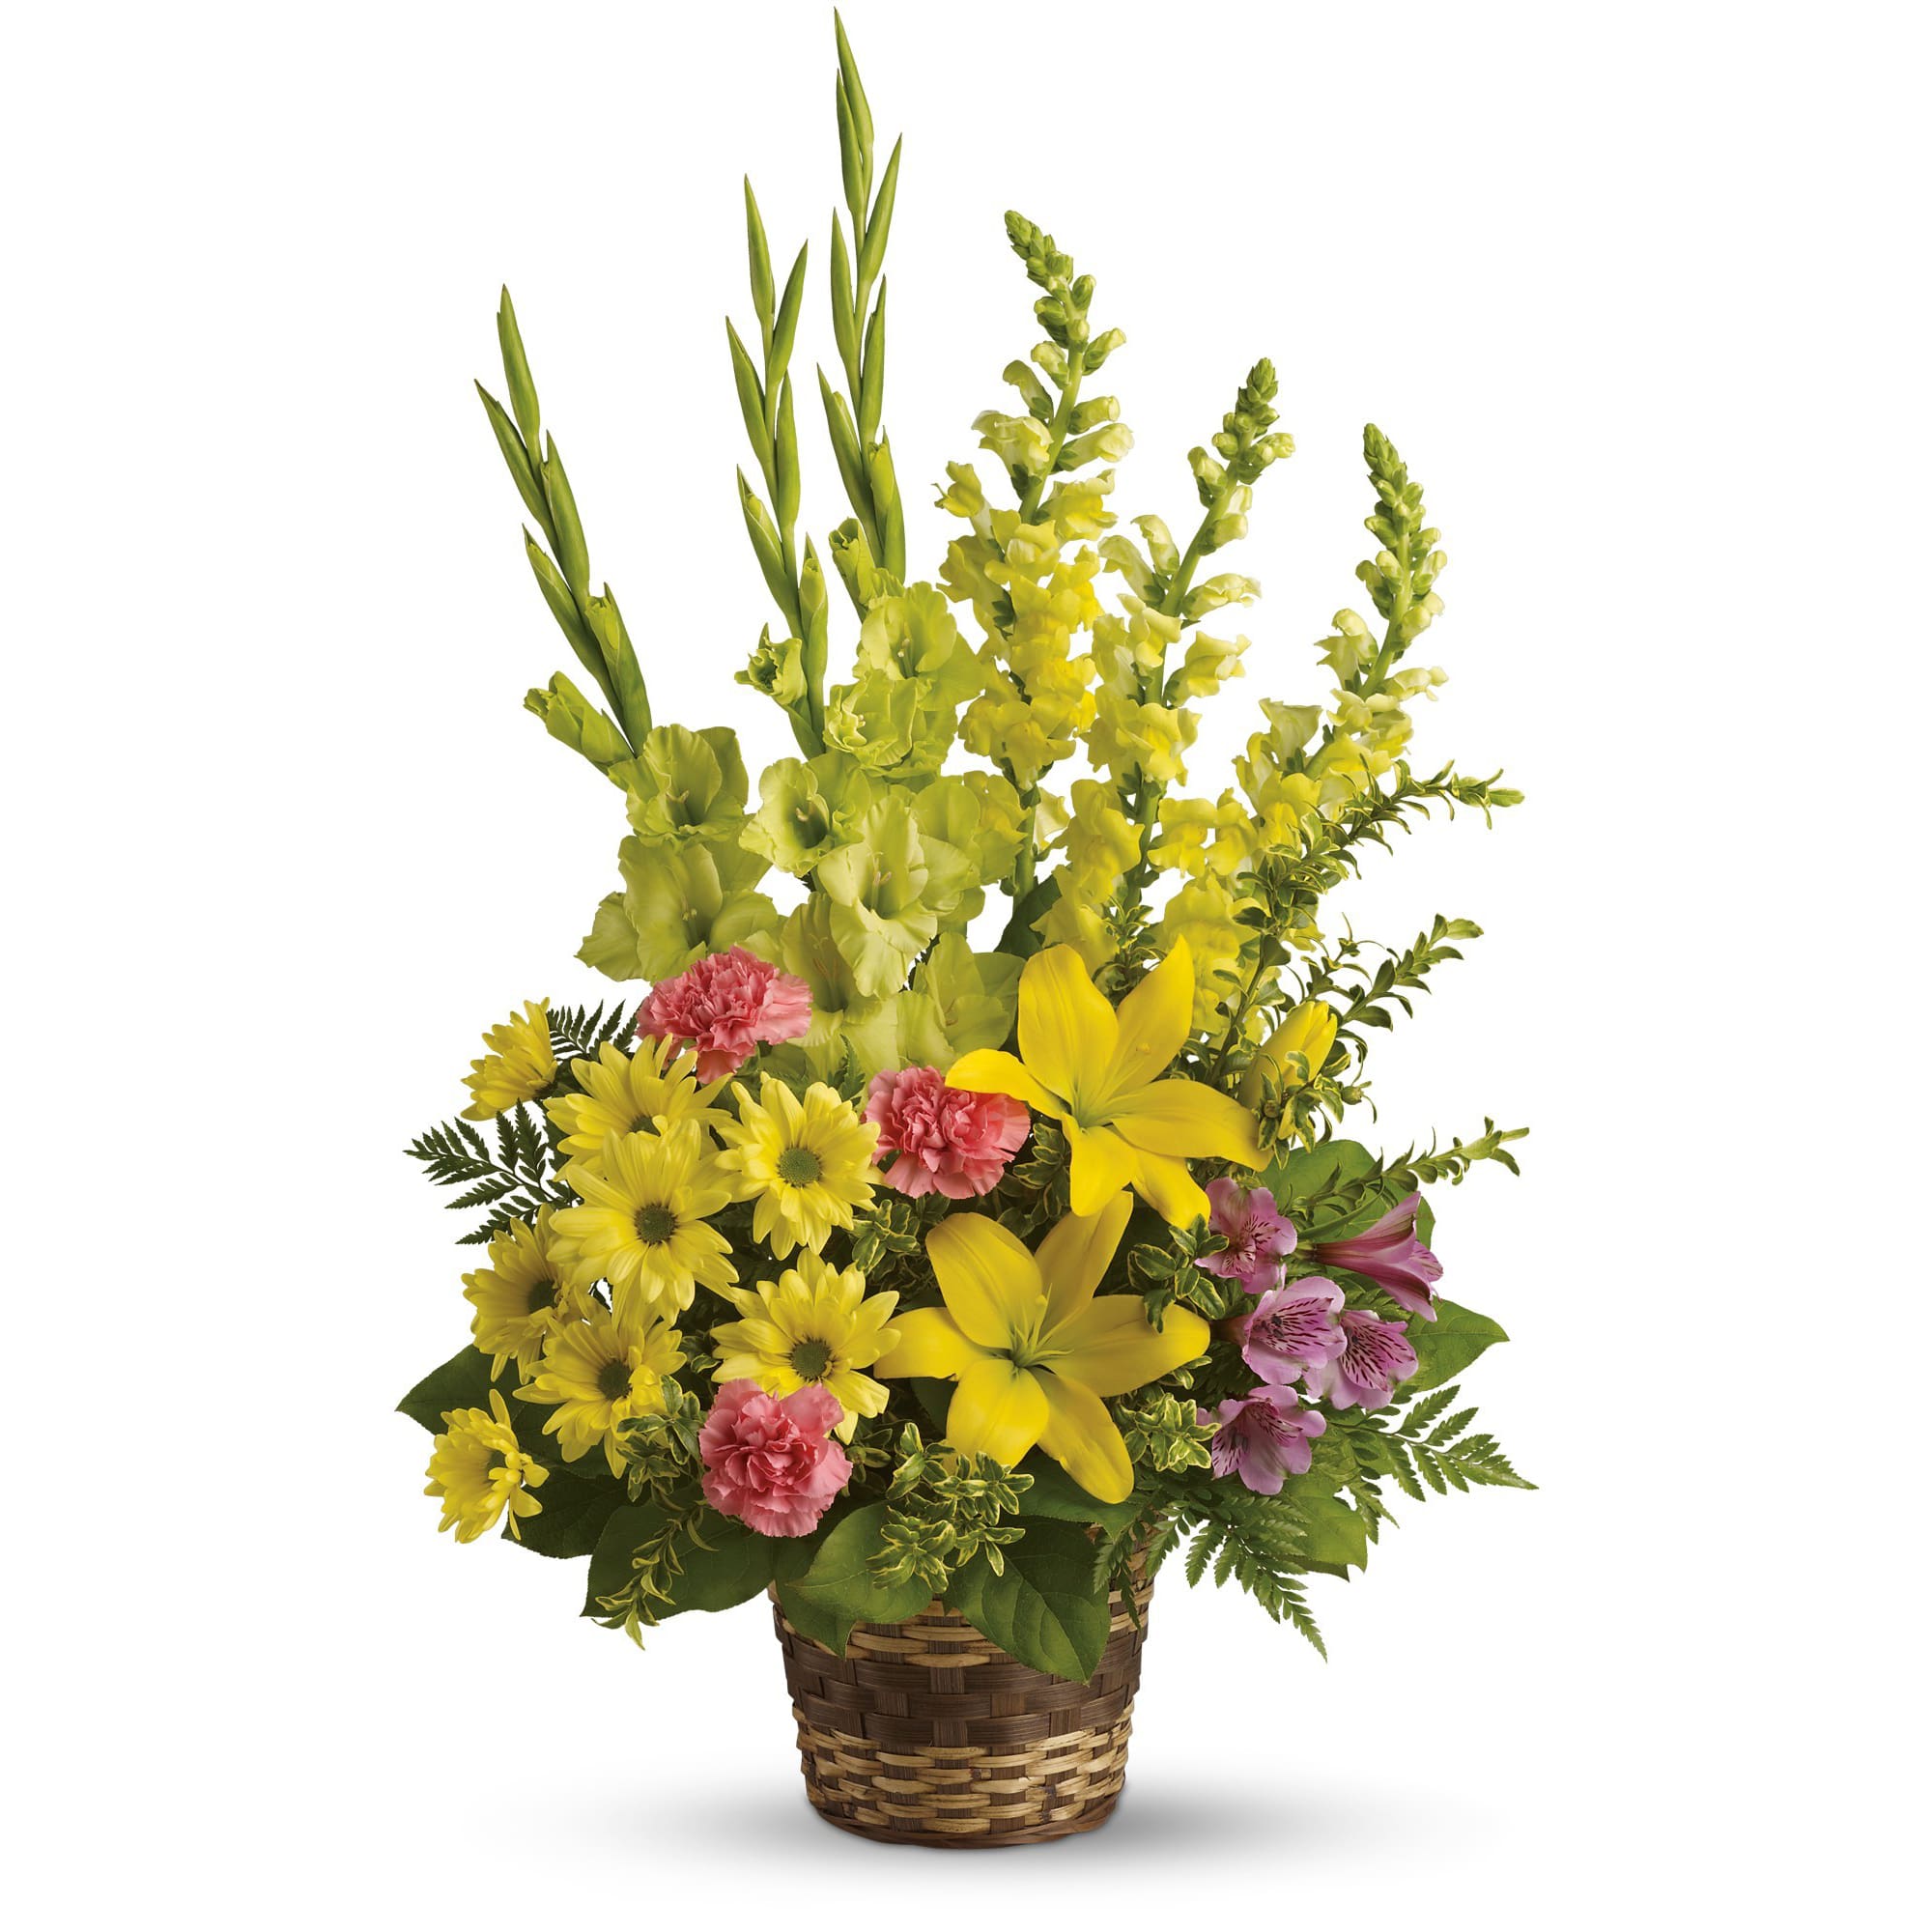 Vivid Recollections by Teleflora - This glorious basket of beautiful blossoms will send hope and let those you care for know that grief is a path they needn't walk alone.  